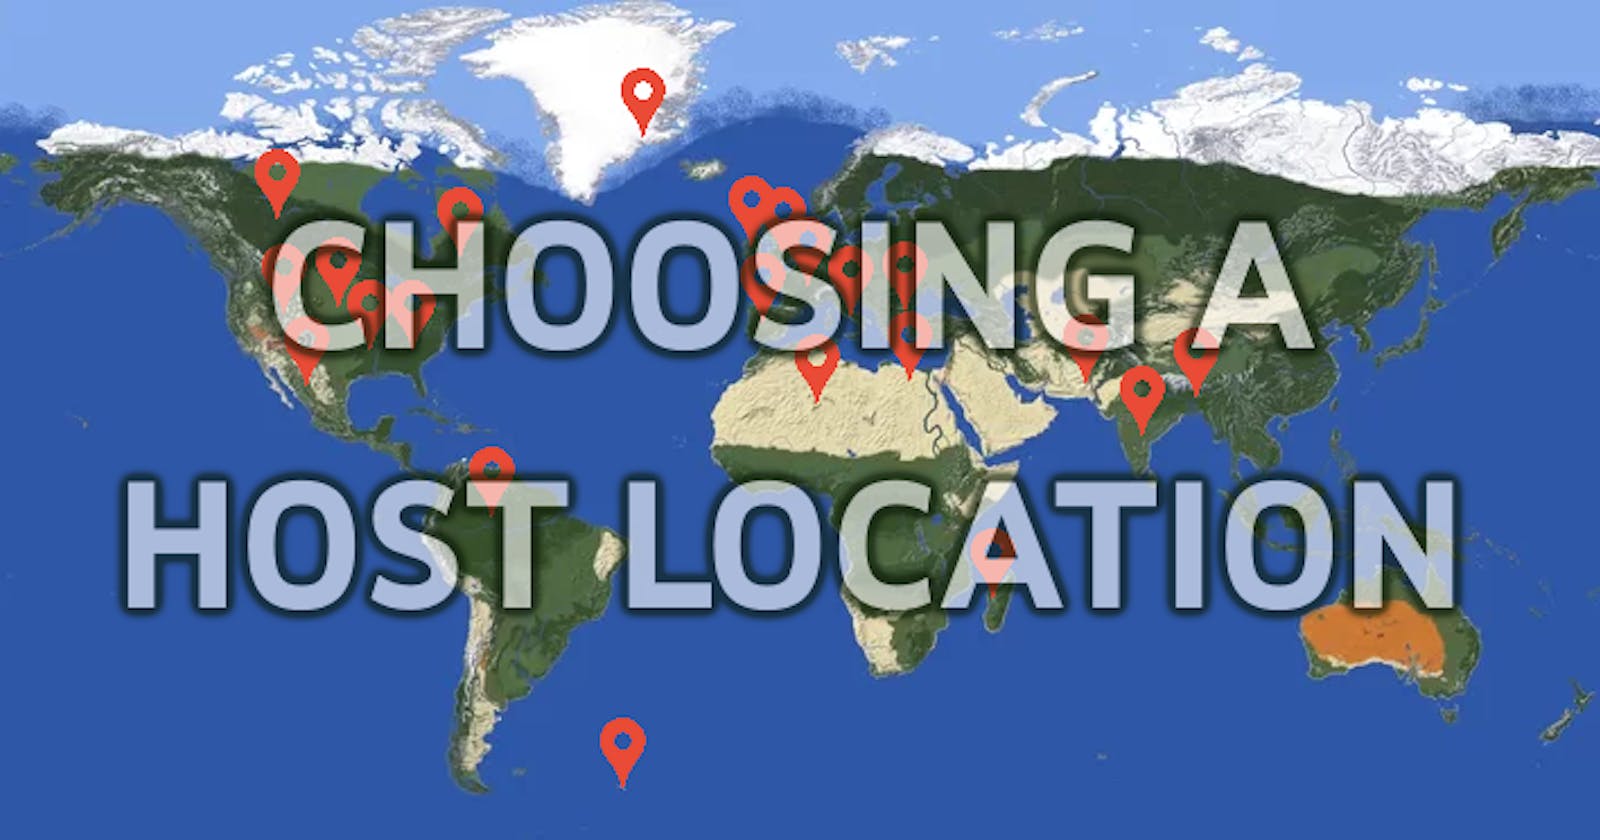 Choosing the right hosting location for a game server